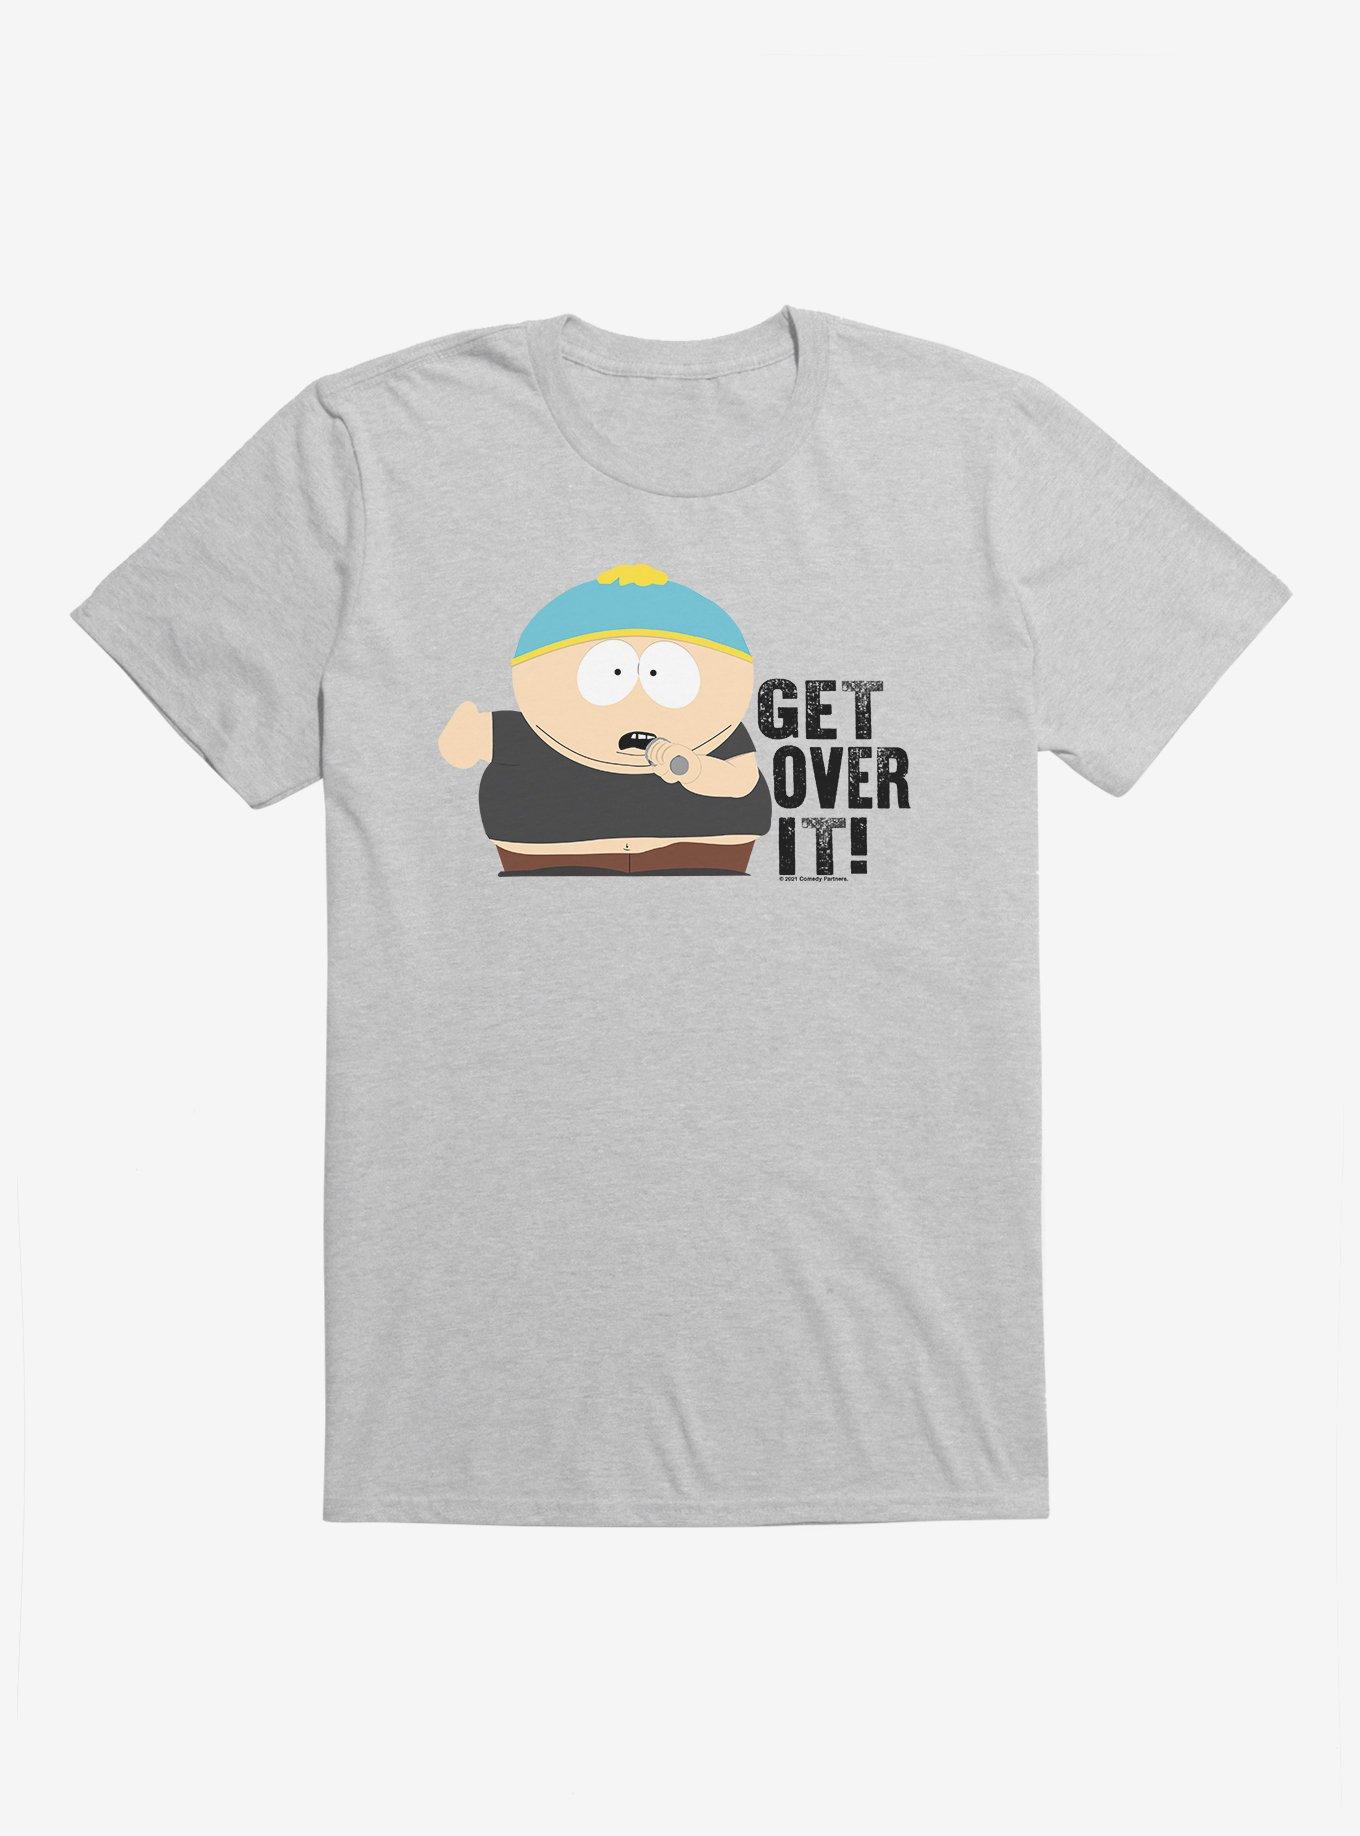 South Park Season Reference Cartman Over It T-Shirt, HEATHER GREY, hi-res